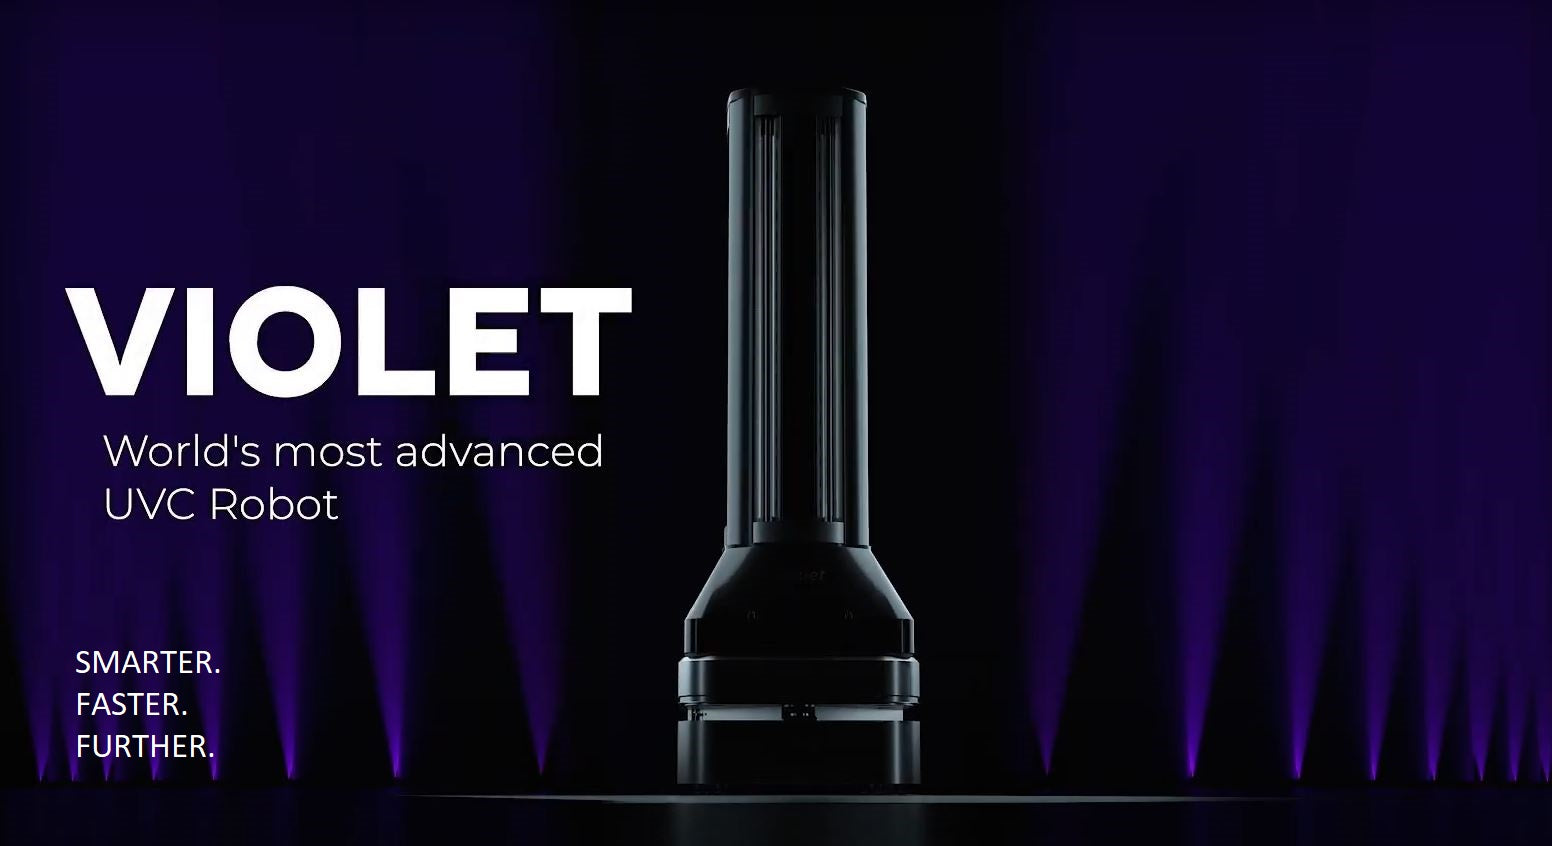 Load video: We&#39;re pleased to announce the release of Violet, the world’s most advanced, fully autonomous smart robot in this virtual launch event.